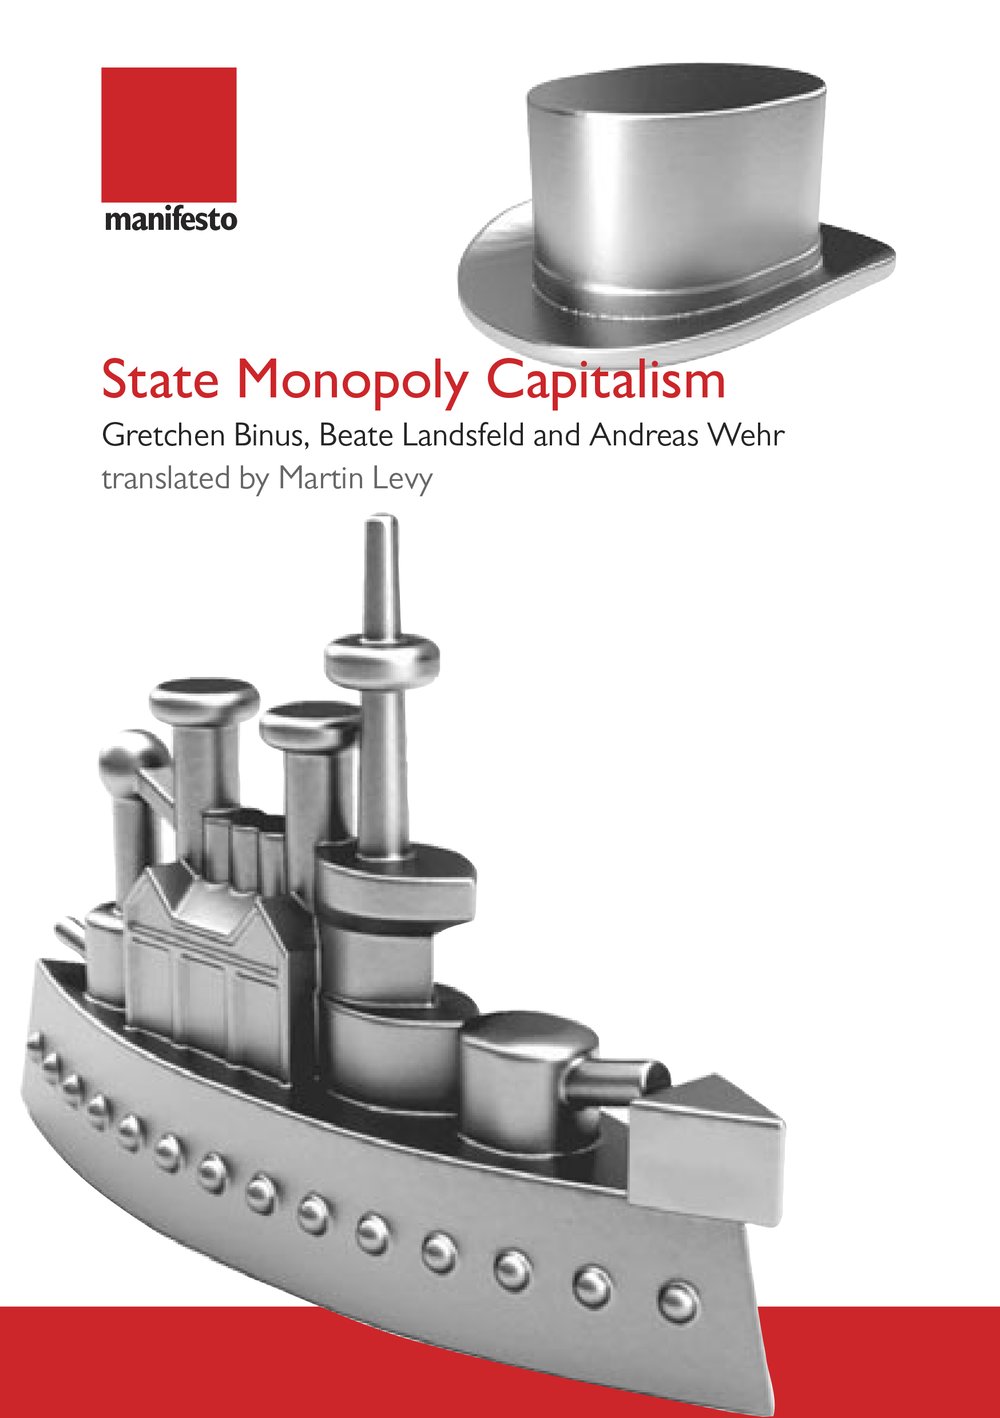 State Monopoly Capitalism